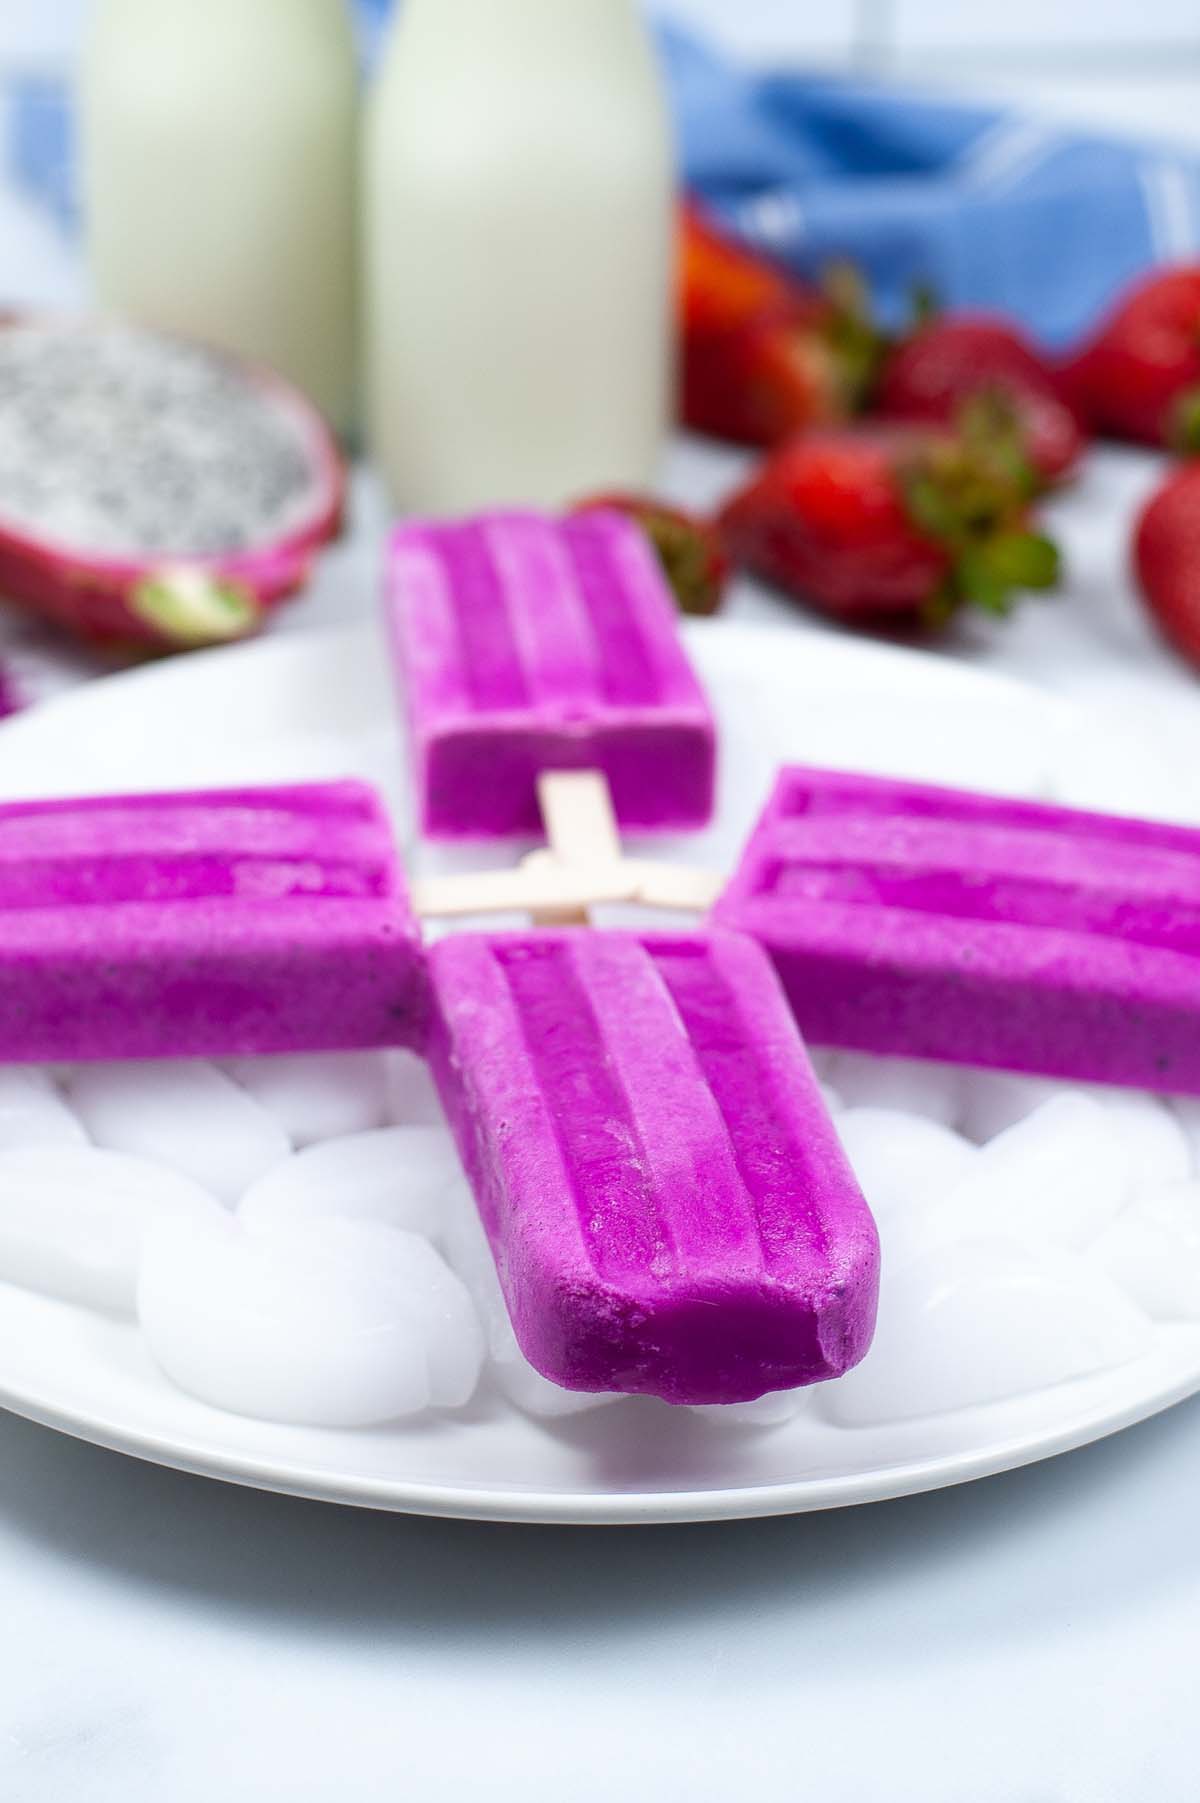 four dragon fruit popsicles on a plate with ice.